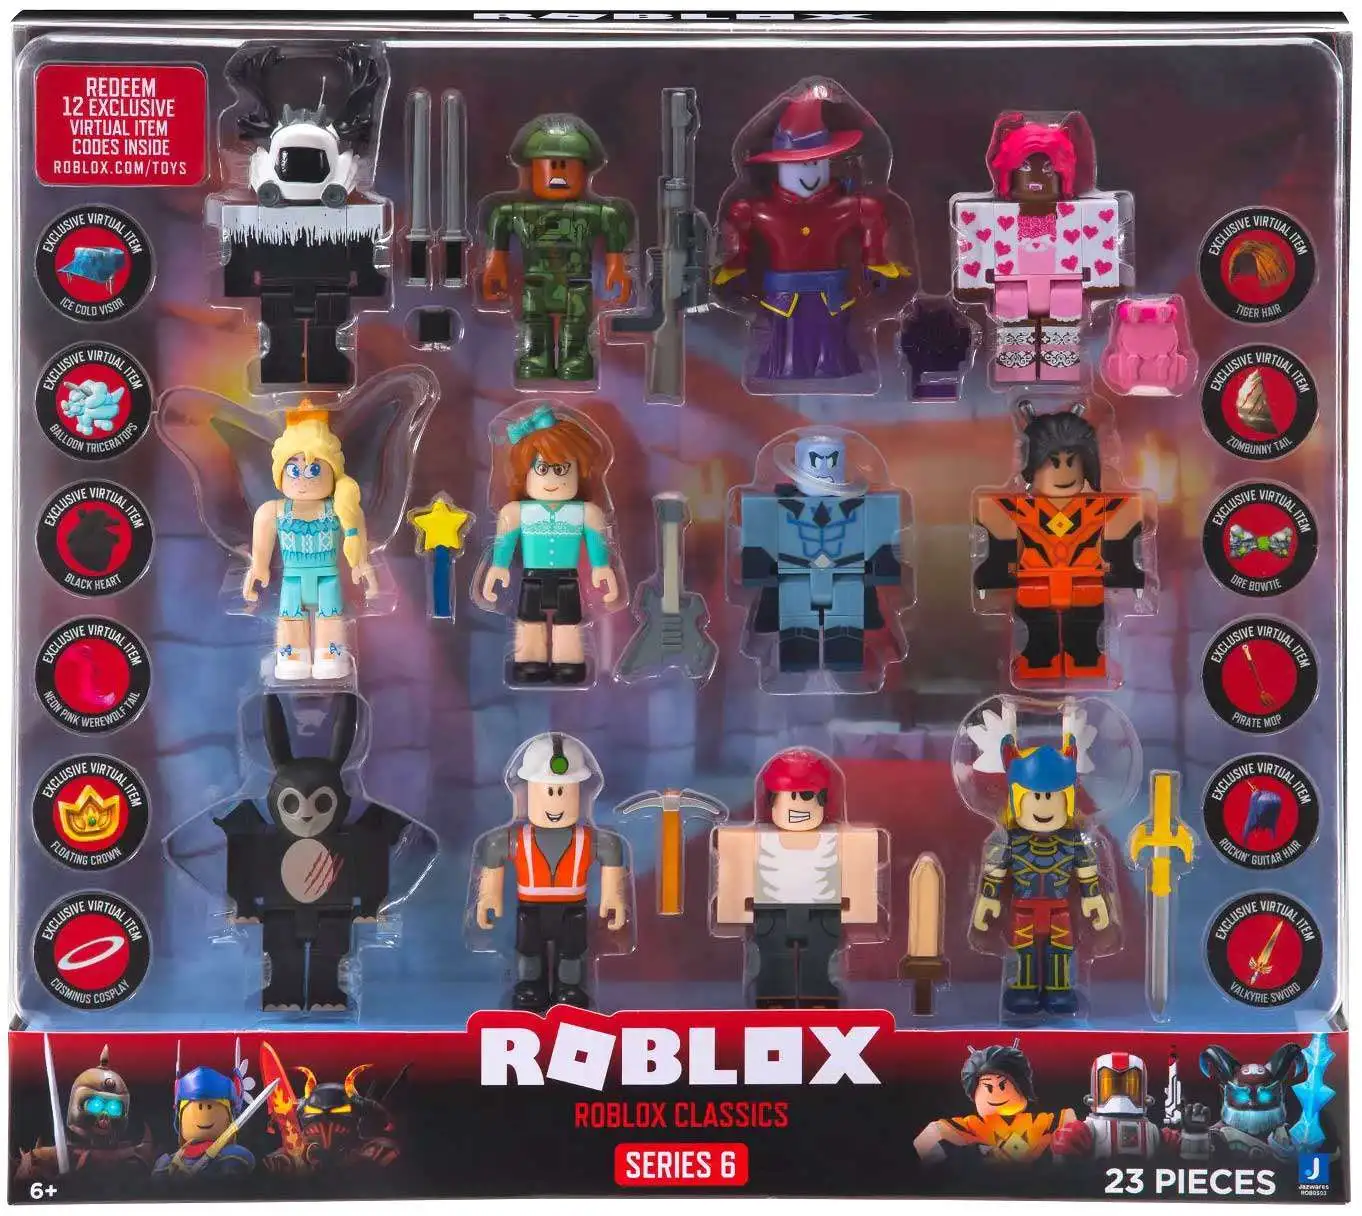  Roblox Celebrity Collection - MeepCity: Meep Hospital Six  Figure Pack [Includes Exclusive Virtual Item] : Toys & Games